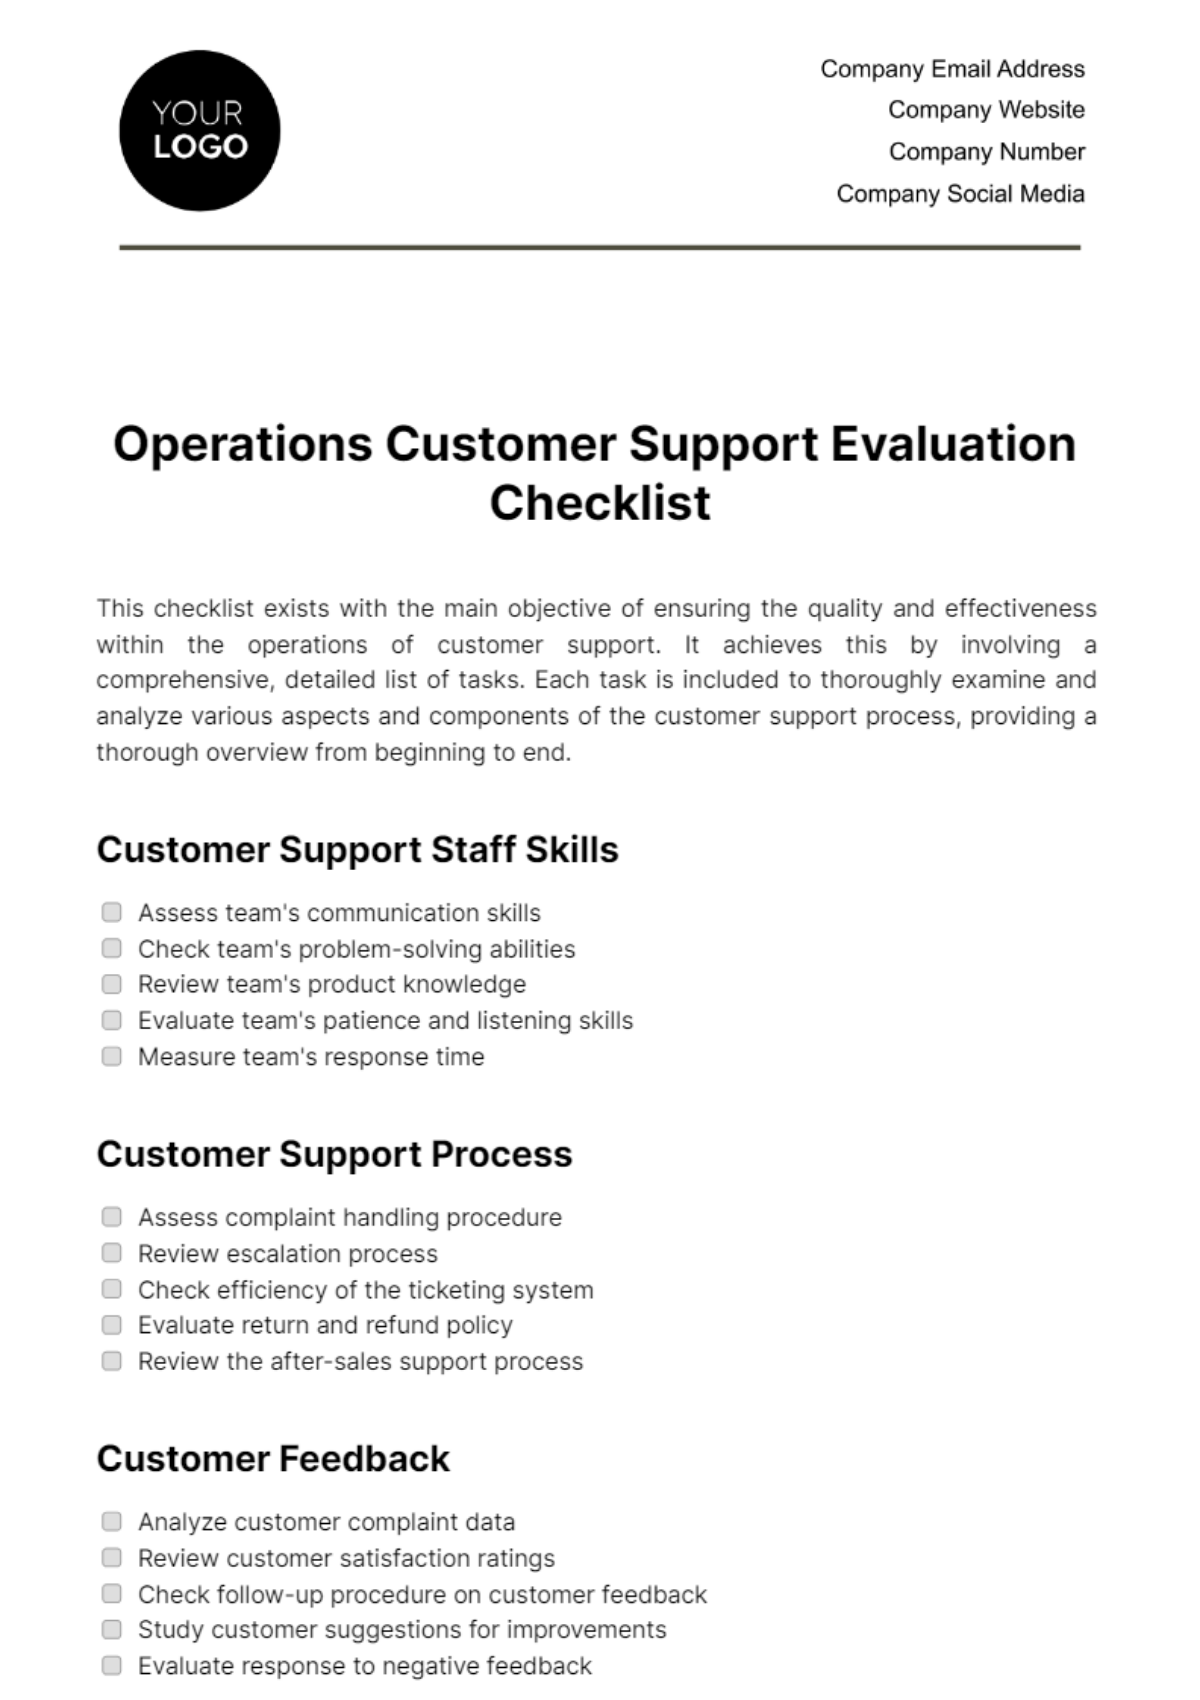 Operations Customer Support Evaluation Checklist Template